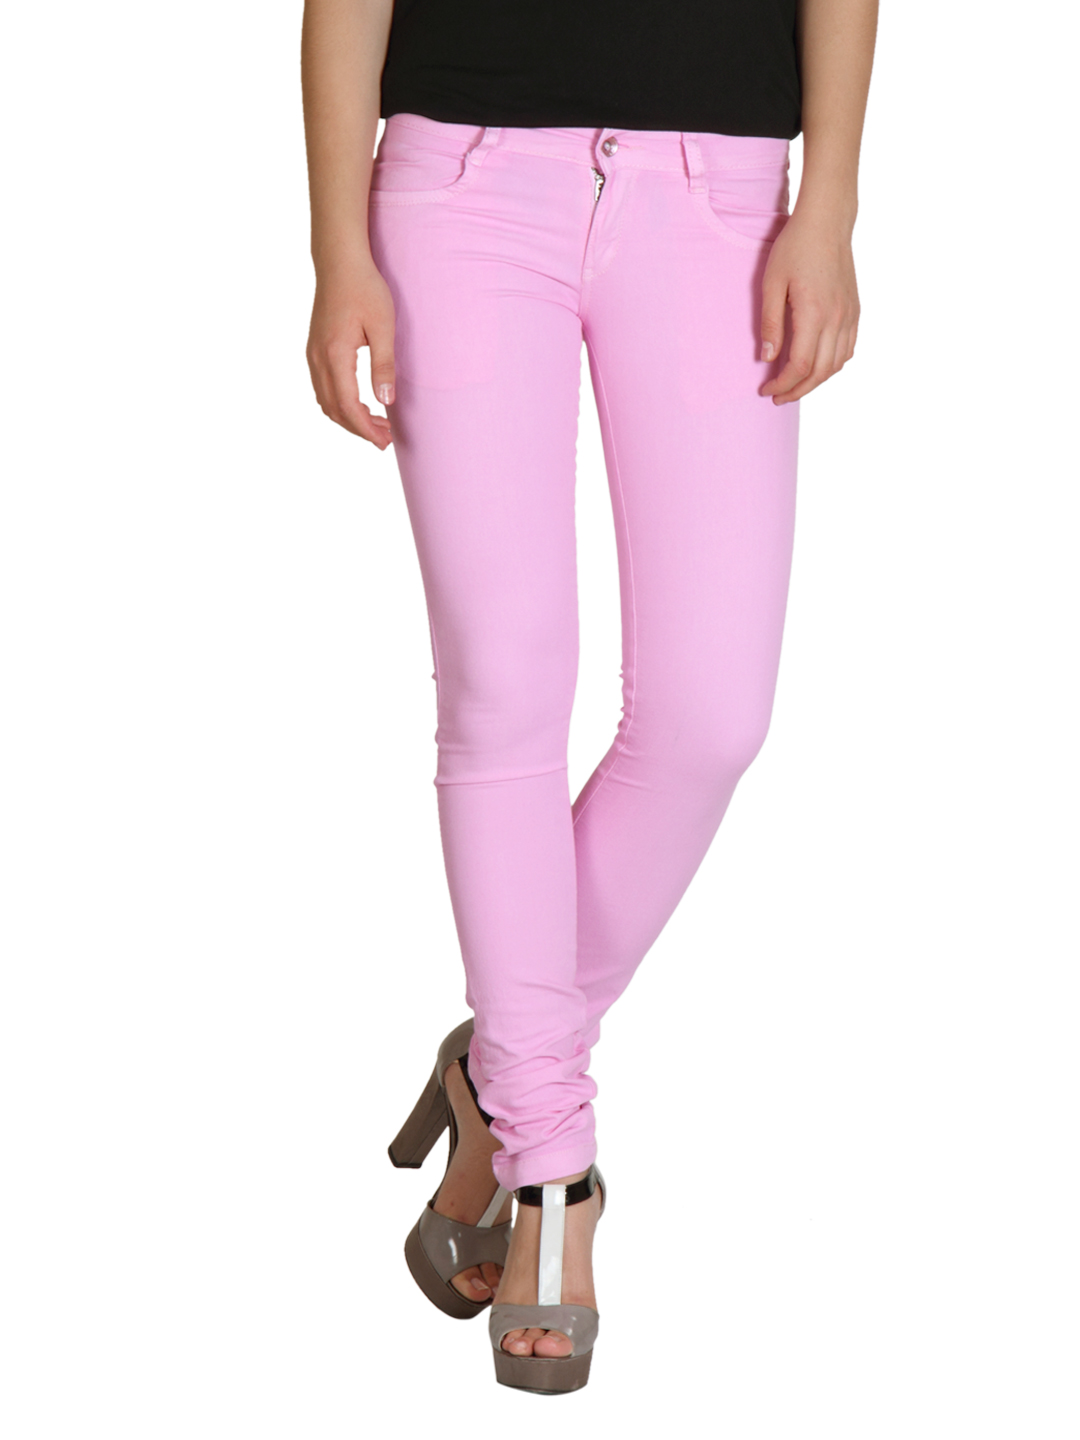 jeans pink